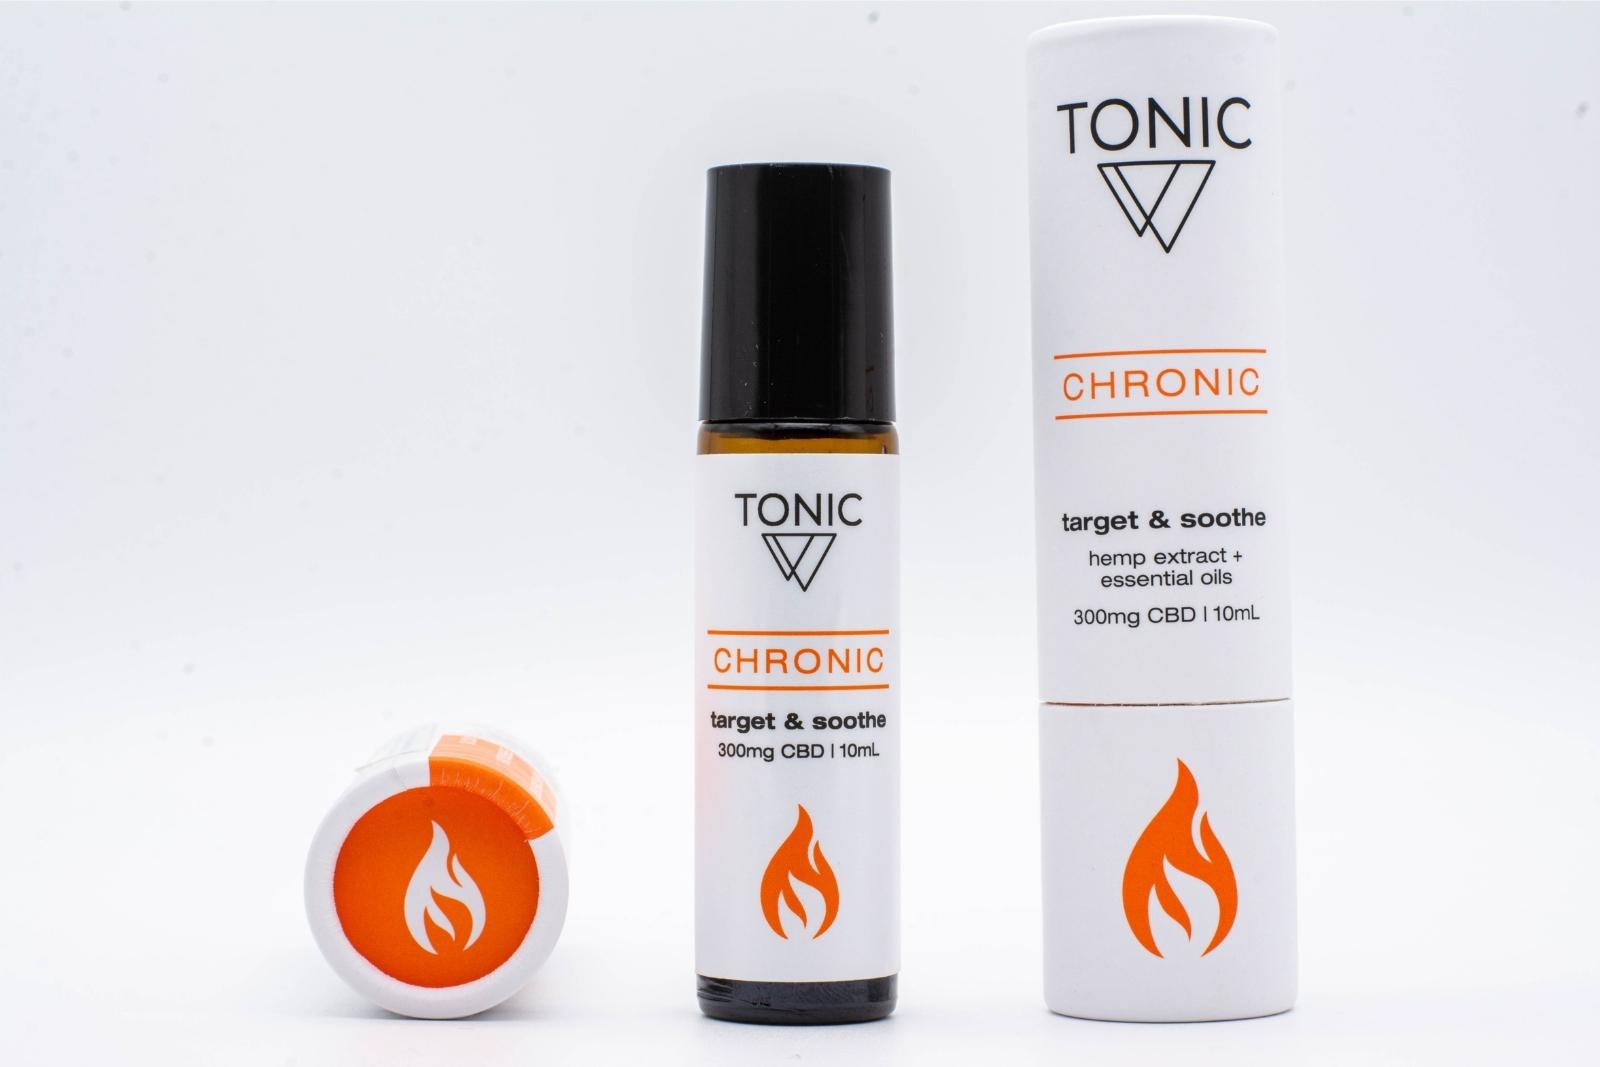 A bottle of Tonic's Chronic CBD + Essential oil roll-on, as well as its container, on a white background